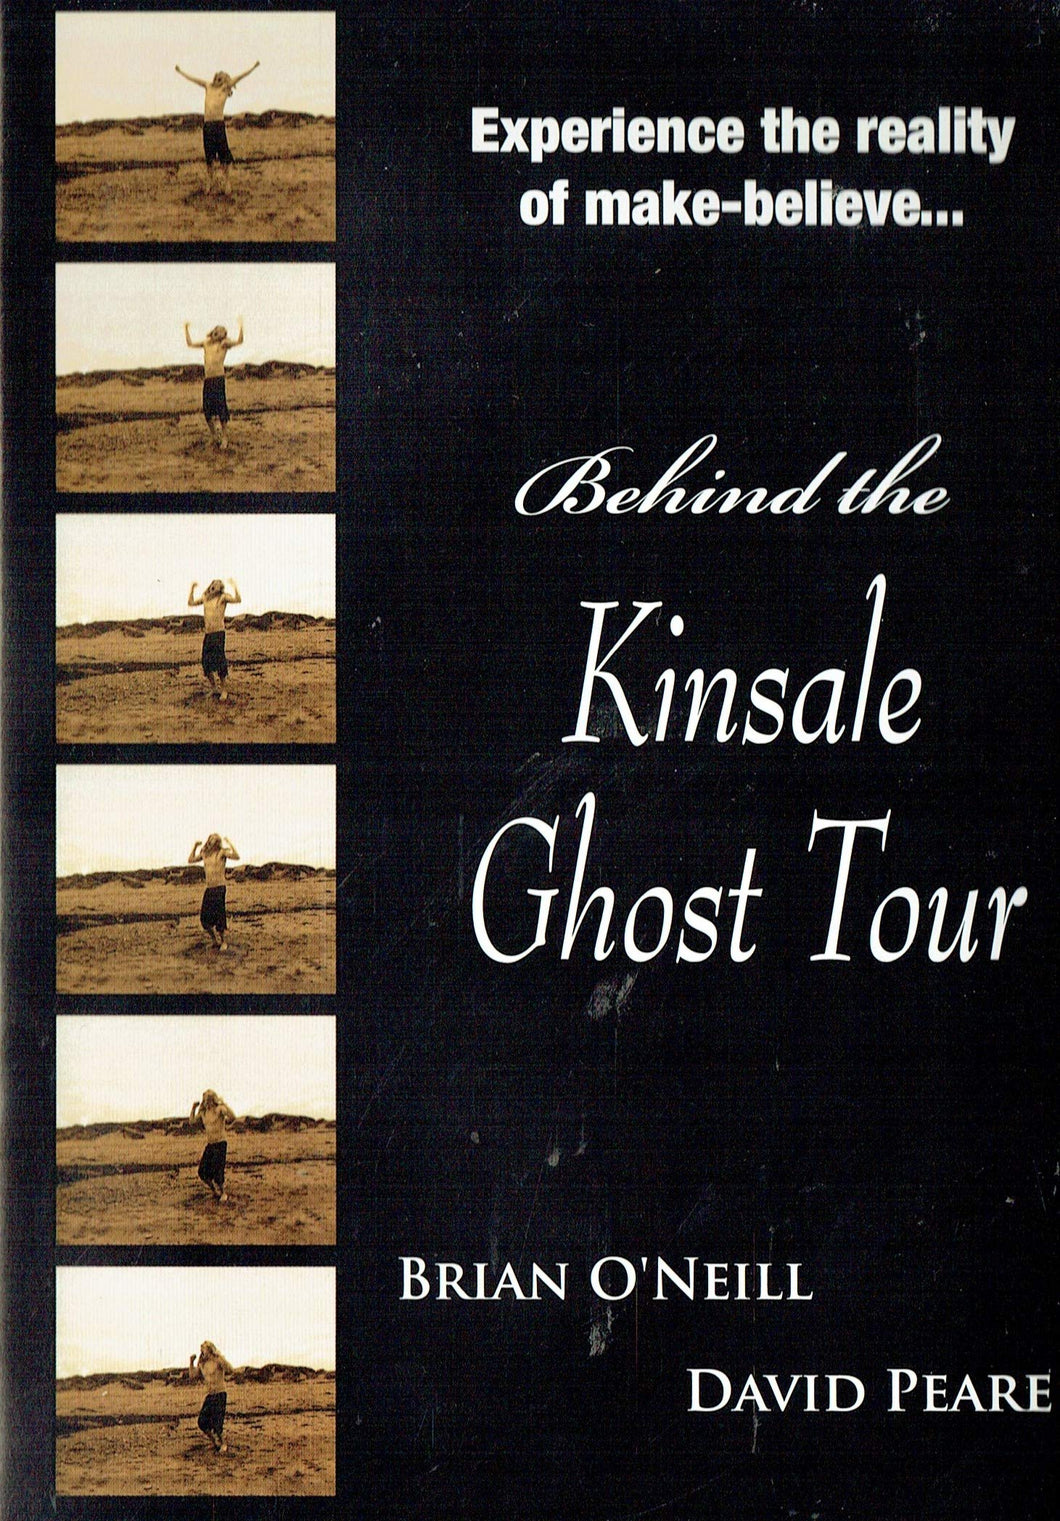 Behind the Kinsale Ghost Tour: Experience the Reality of Make-believe